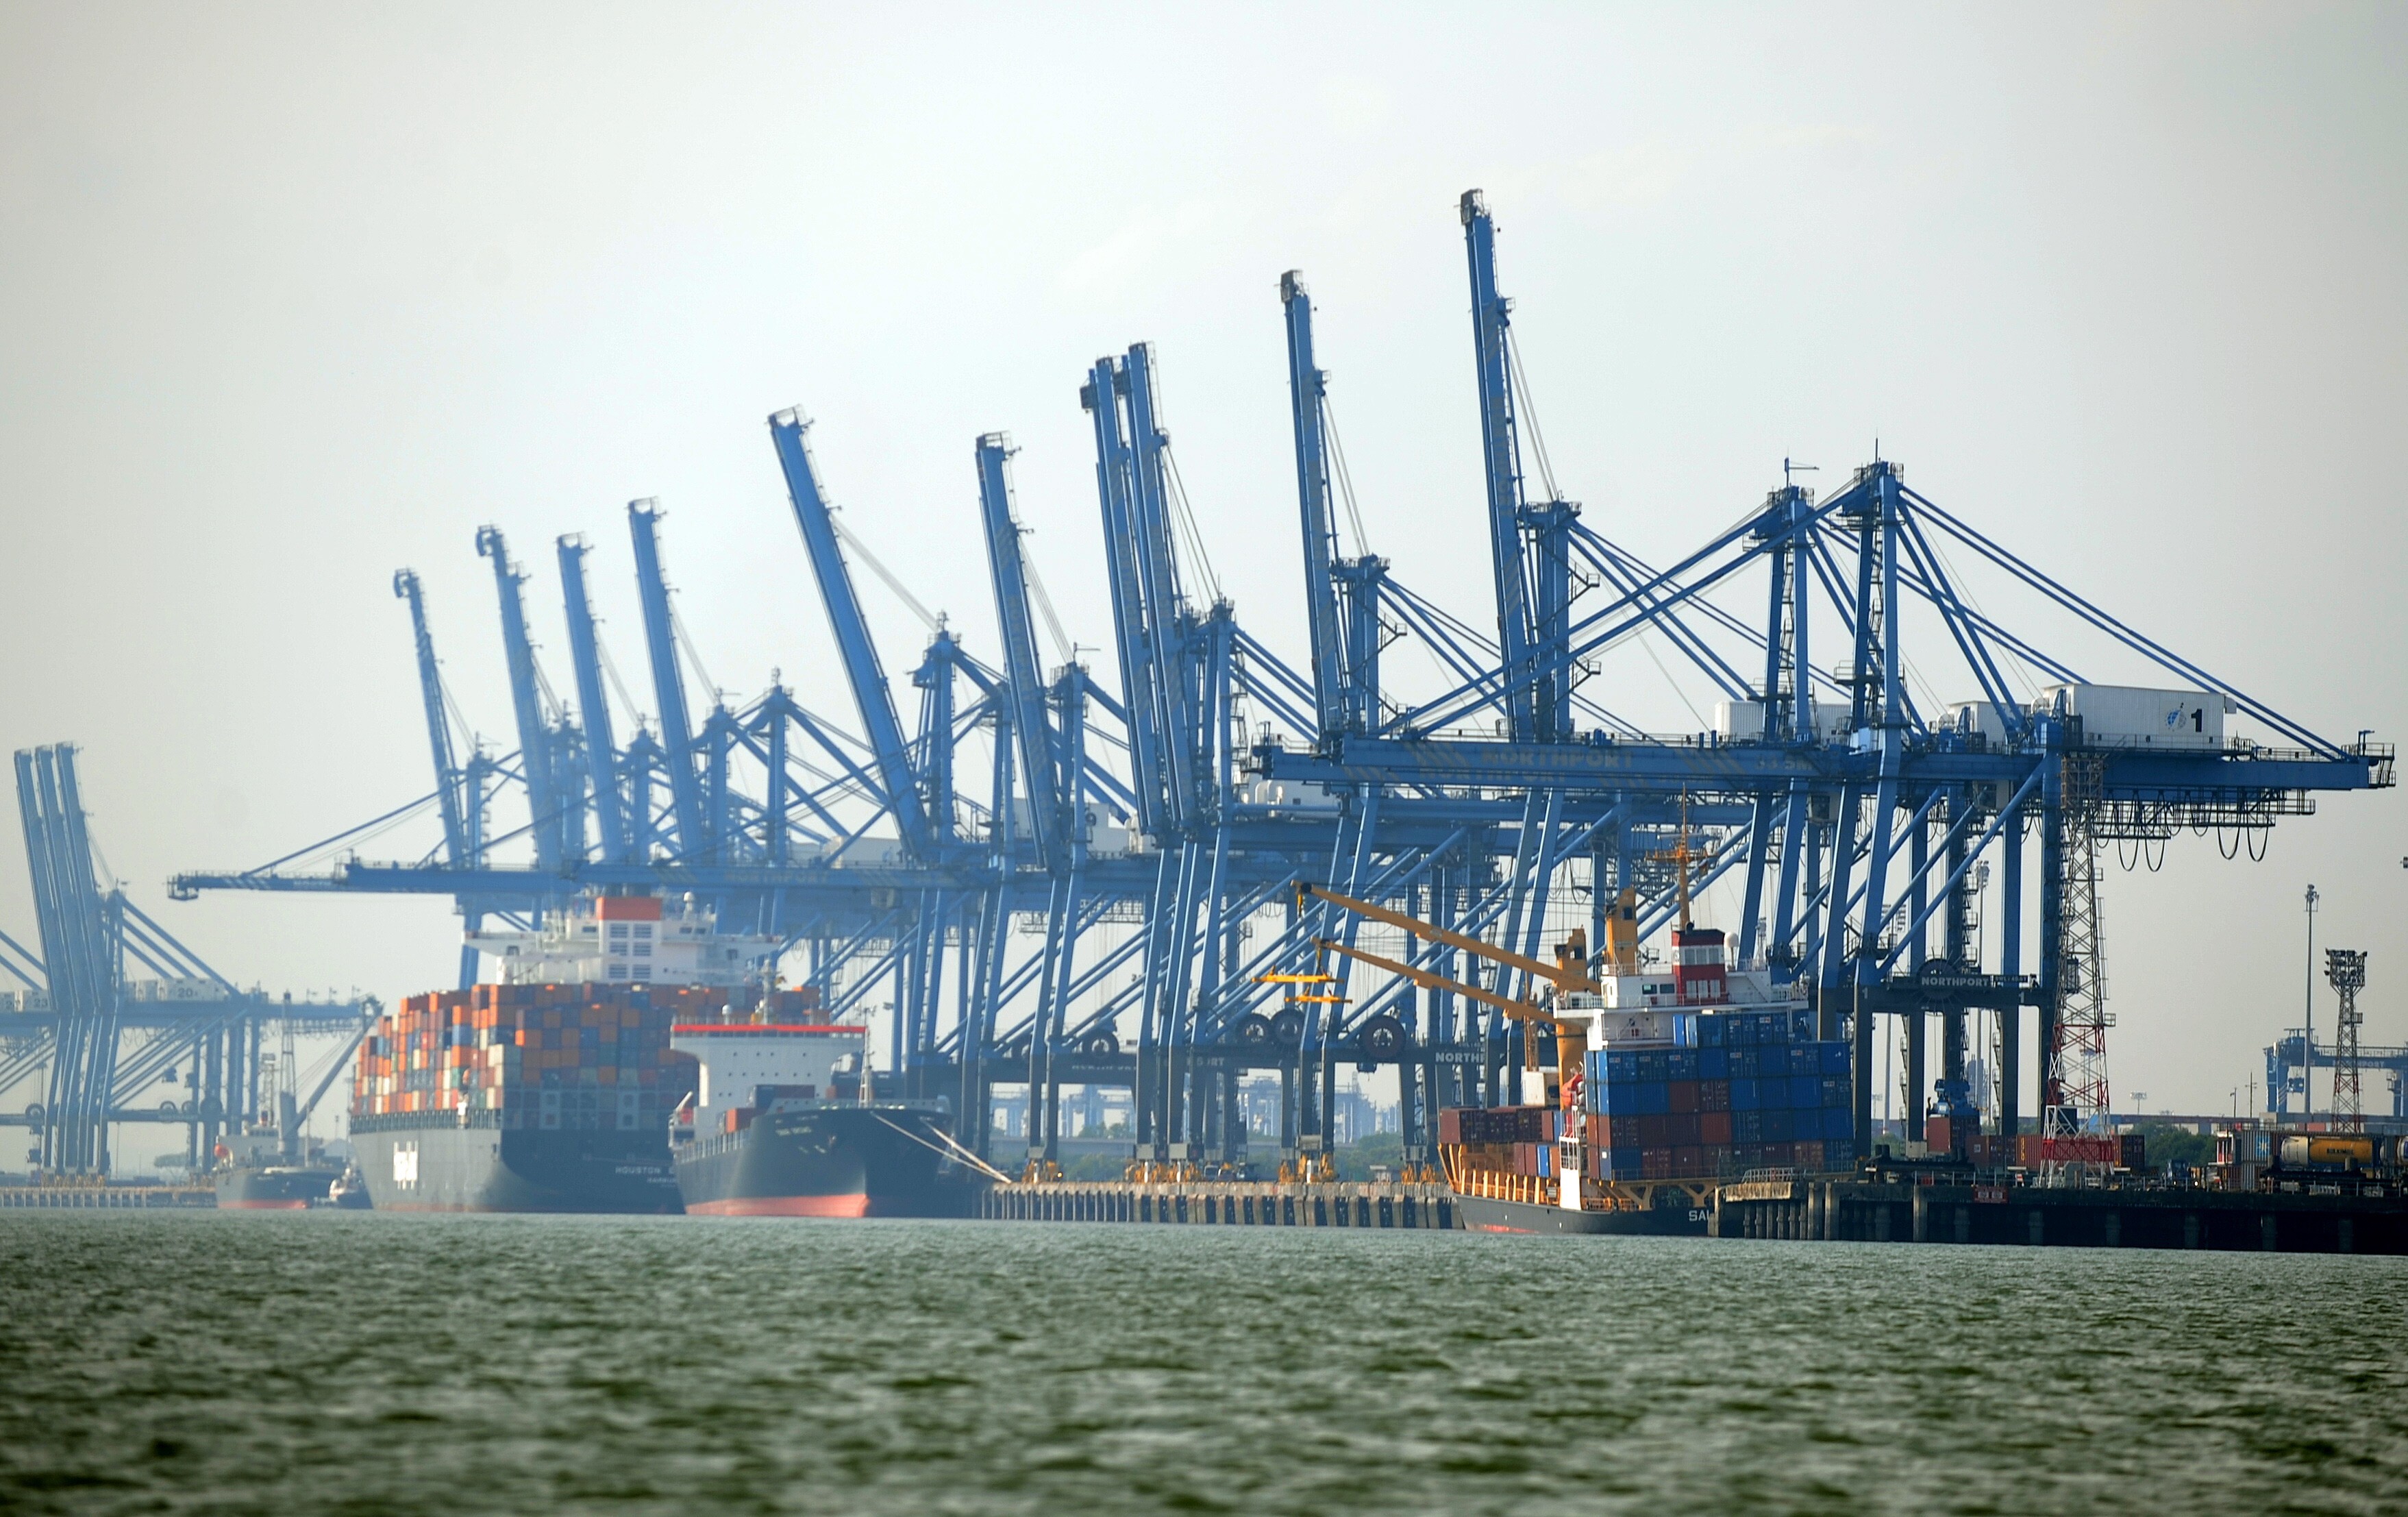 Malaysia’s Kuantan Port Expansion and Melaka Deepwater Port projects, which have similar ownership structures, demonstrate how the interests and agency of local actors matter, as they can support, co-opt, or subvert large-scale projects for their own ends. Photo: AFP